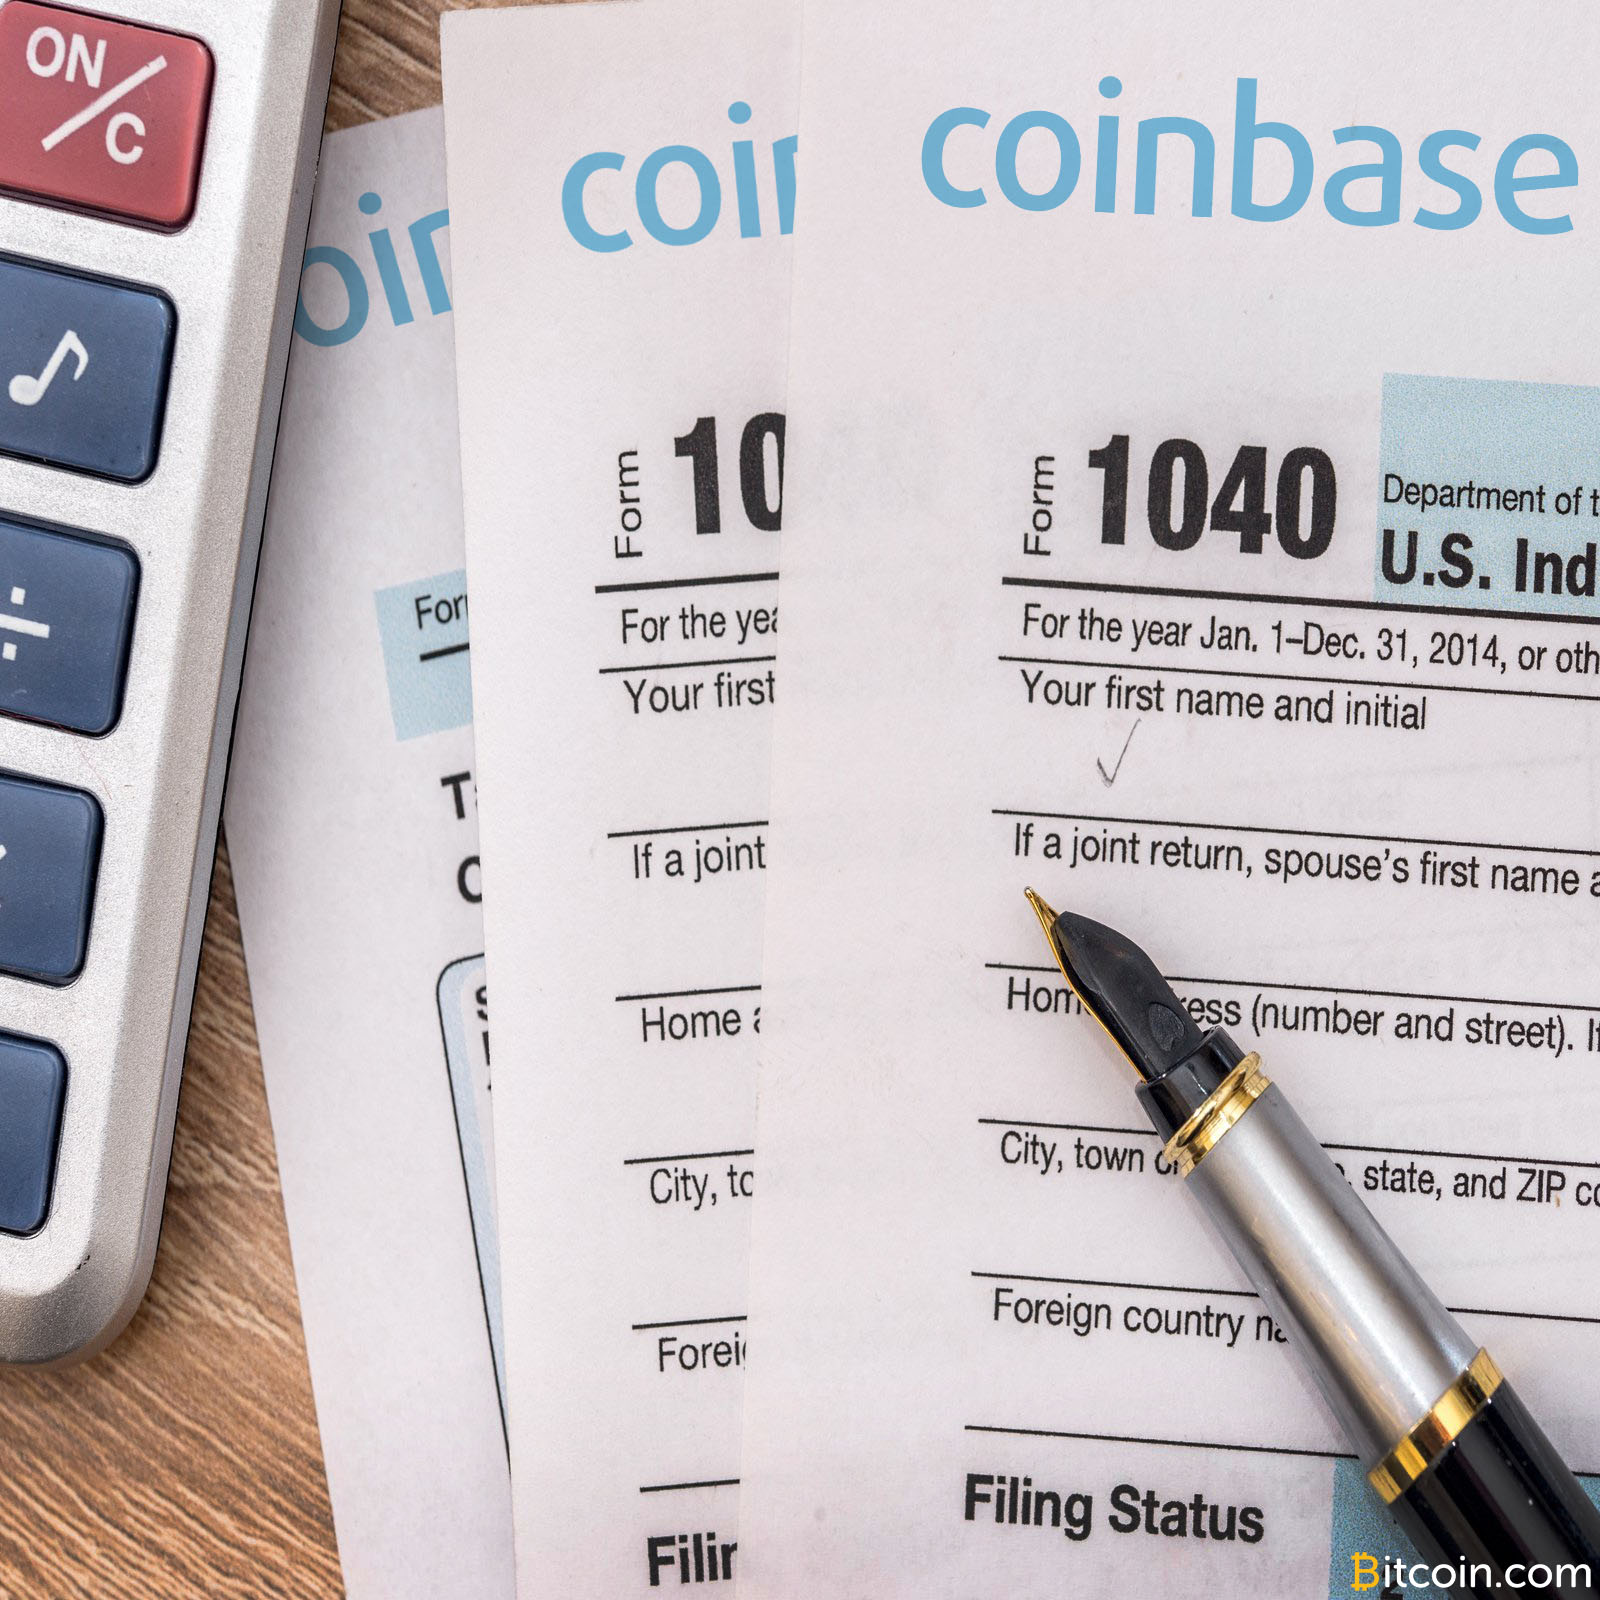 The IRS May Get Approval to Conduct Coinbase Tax Probe